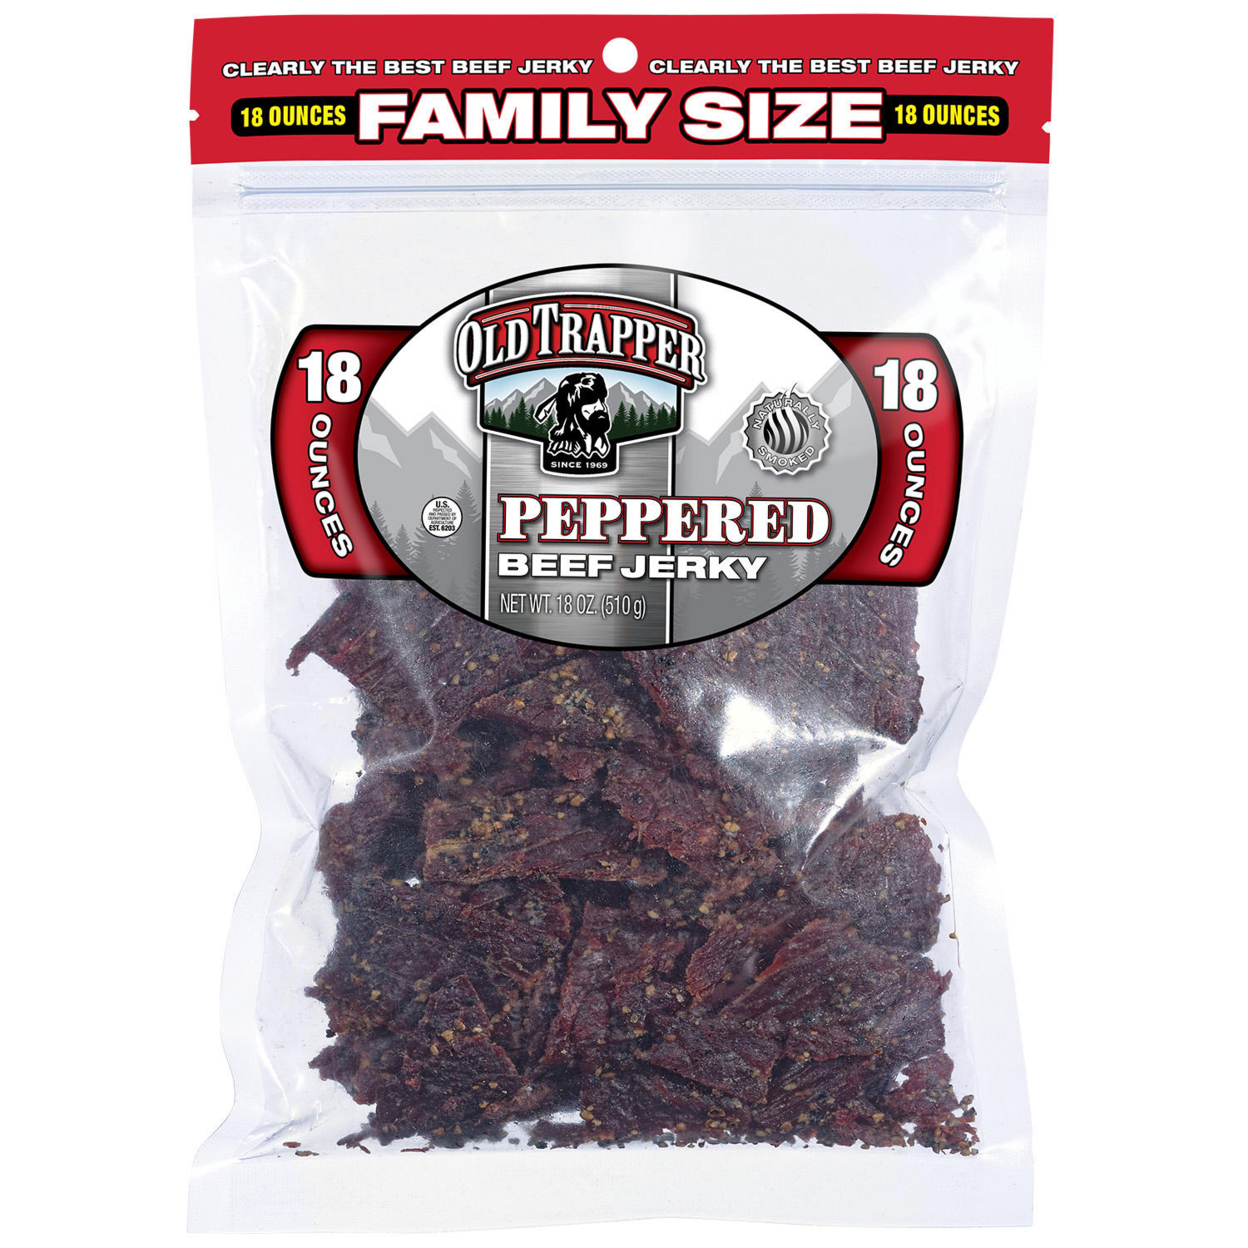 Old Trapper Peppered Beef Jerky (18 Ounce)